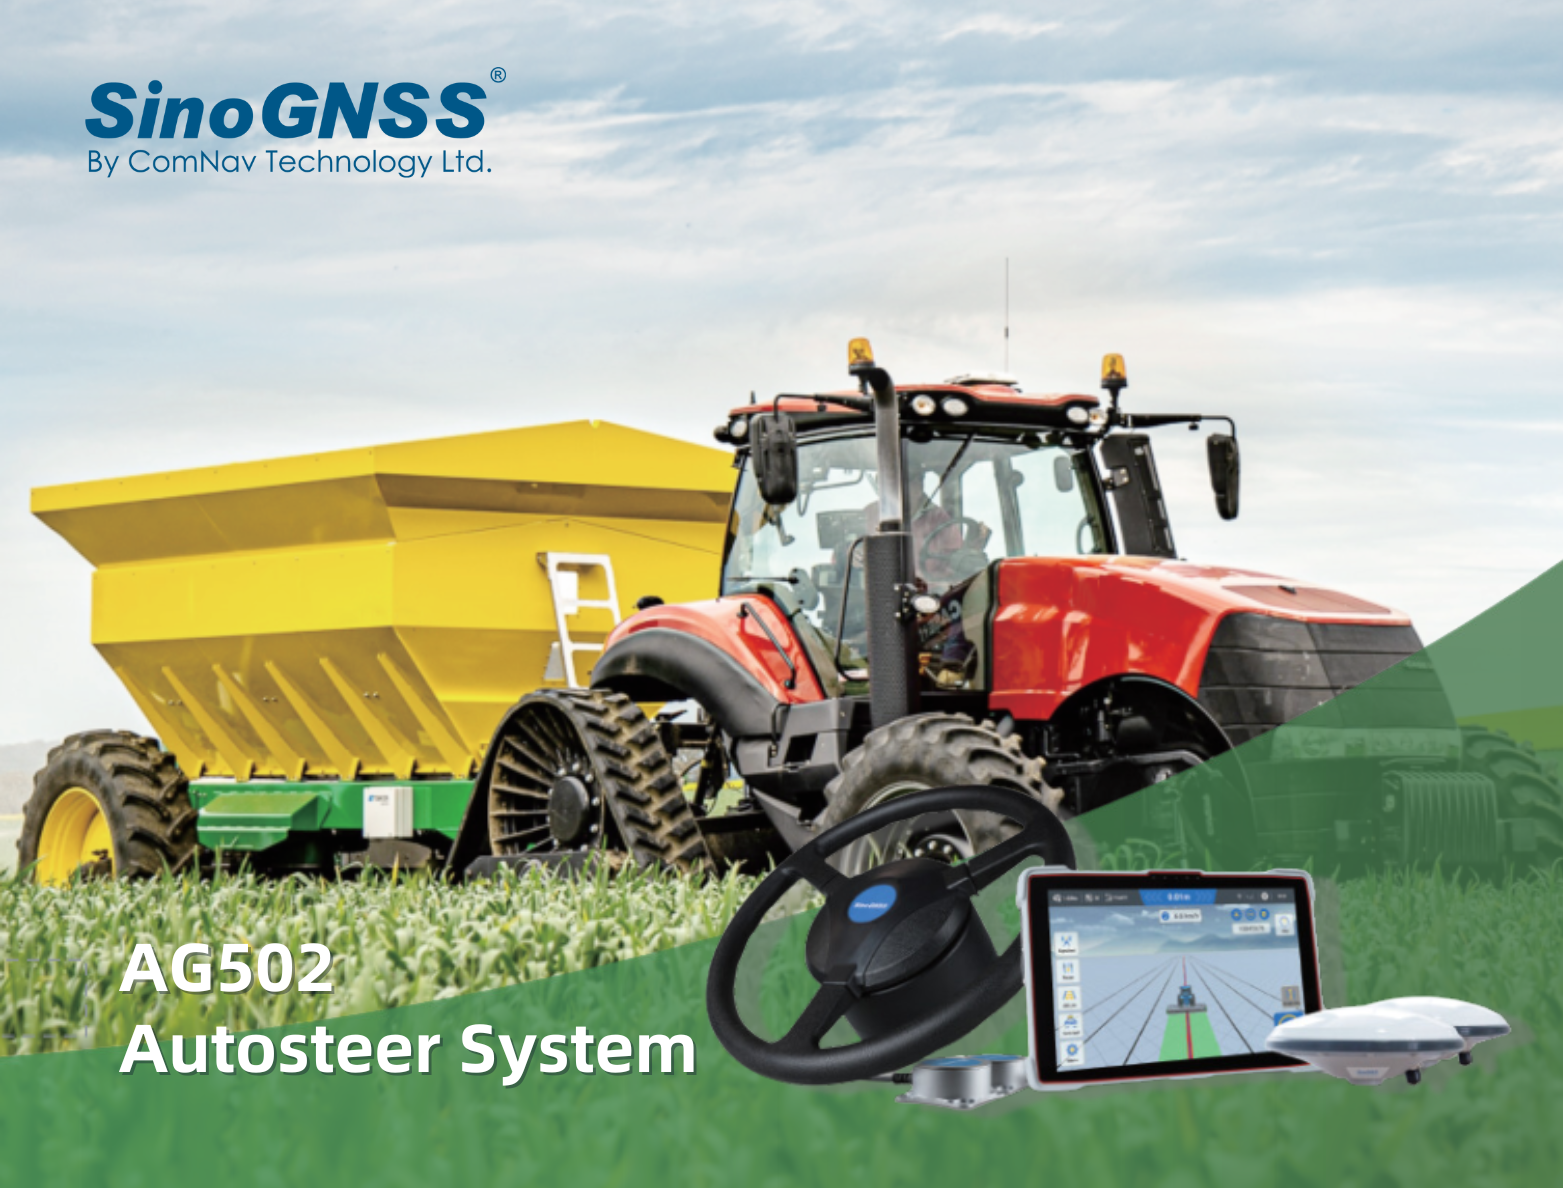 Harvesting Tomorrow: The Launch of ComNav's AG502 Auto Steering System